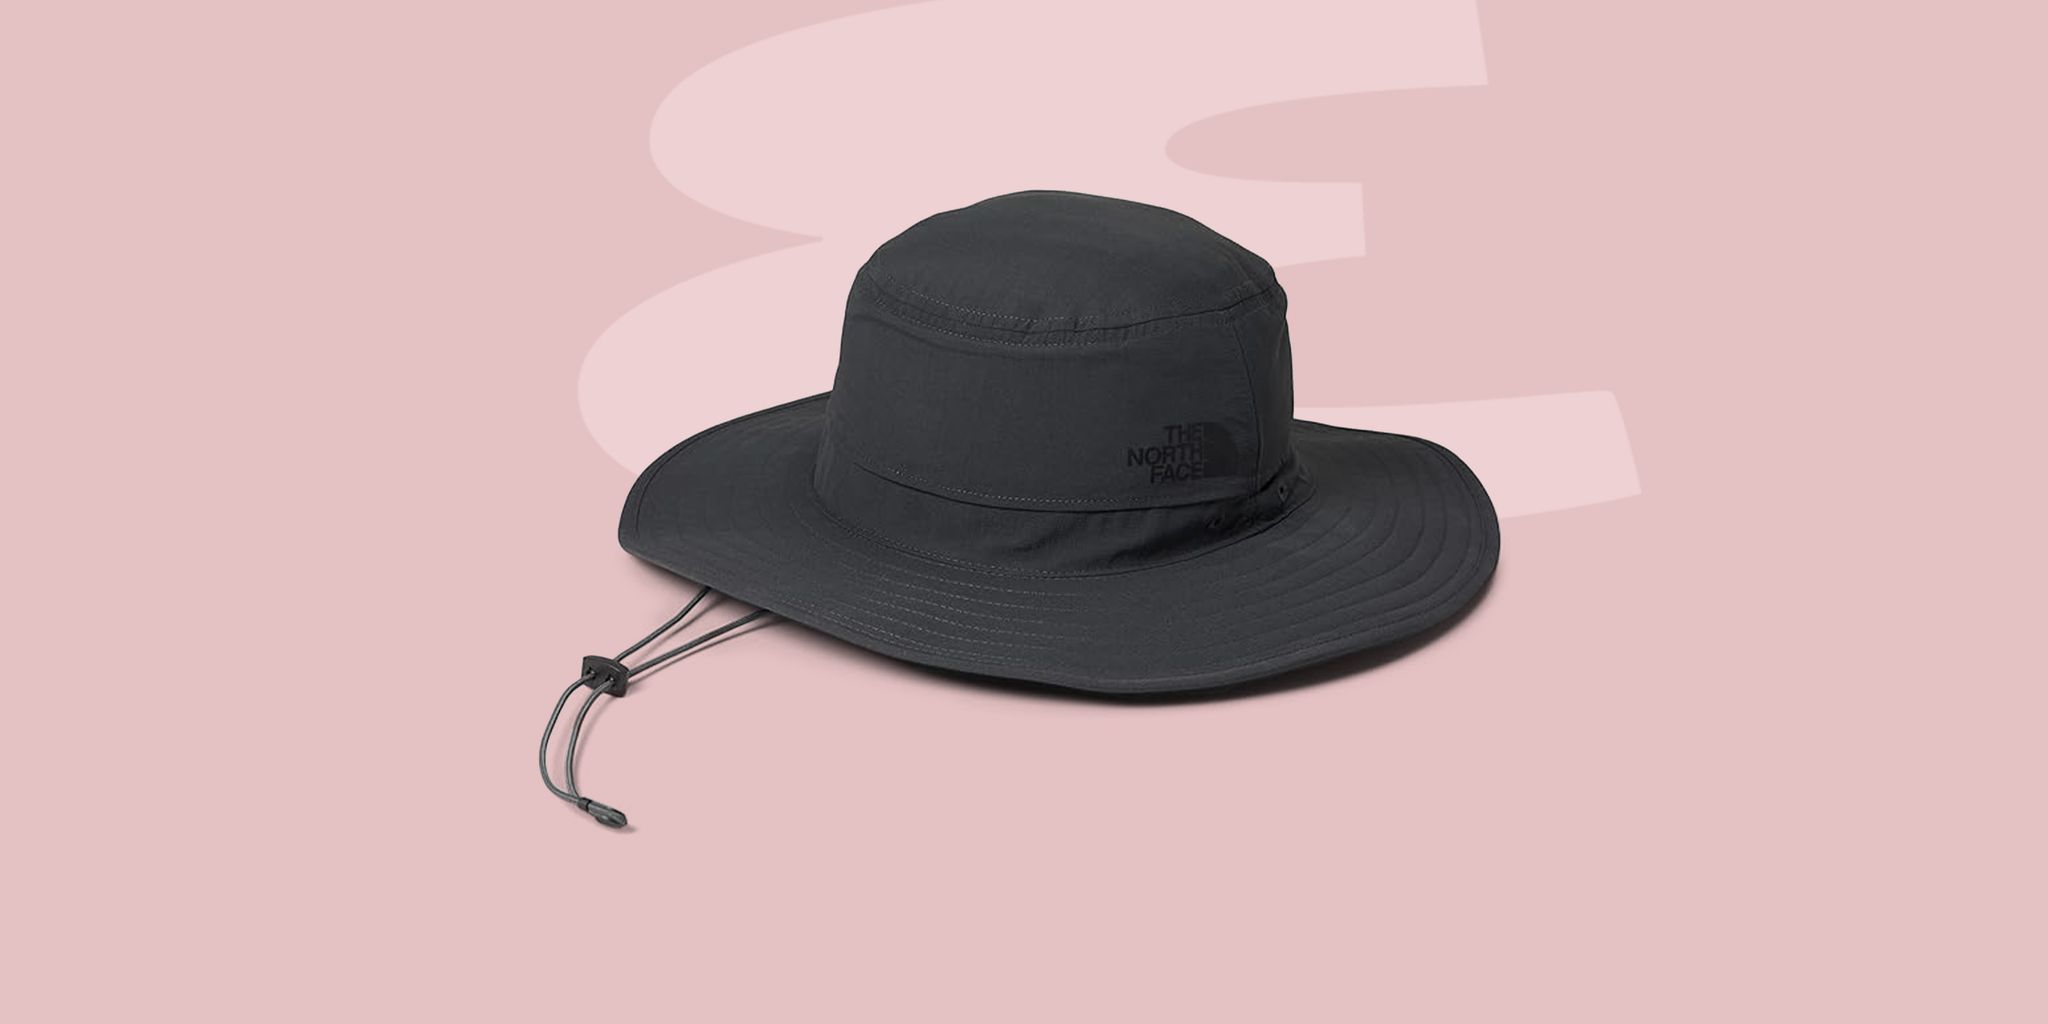 a black hat on a white surface